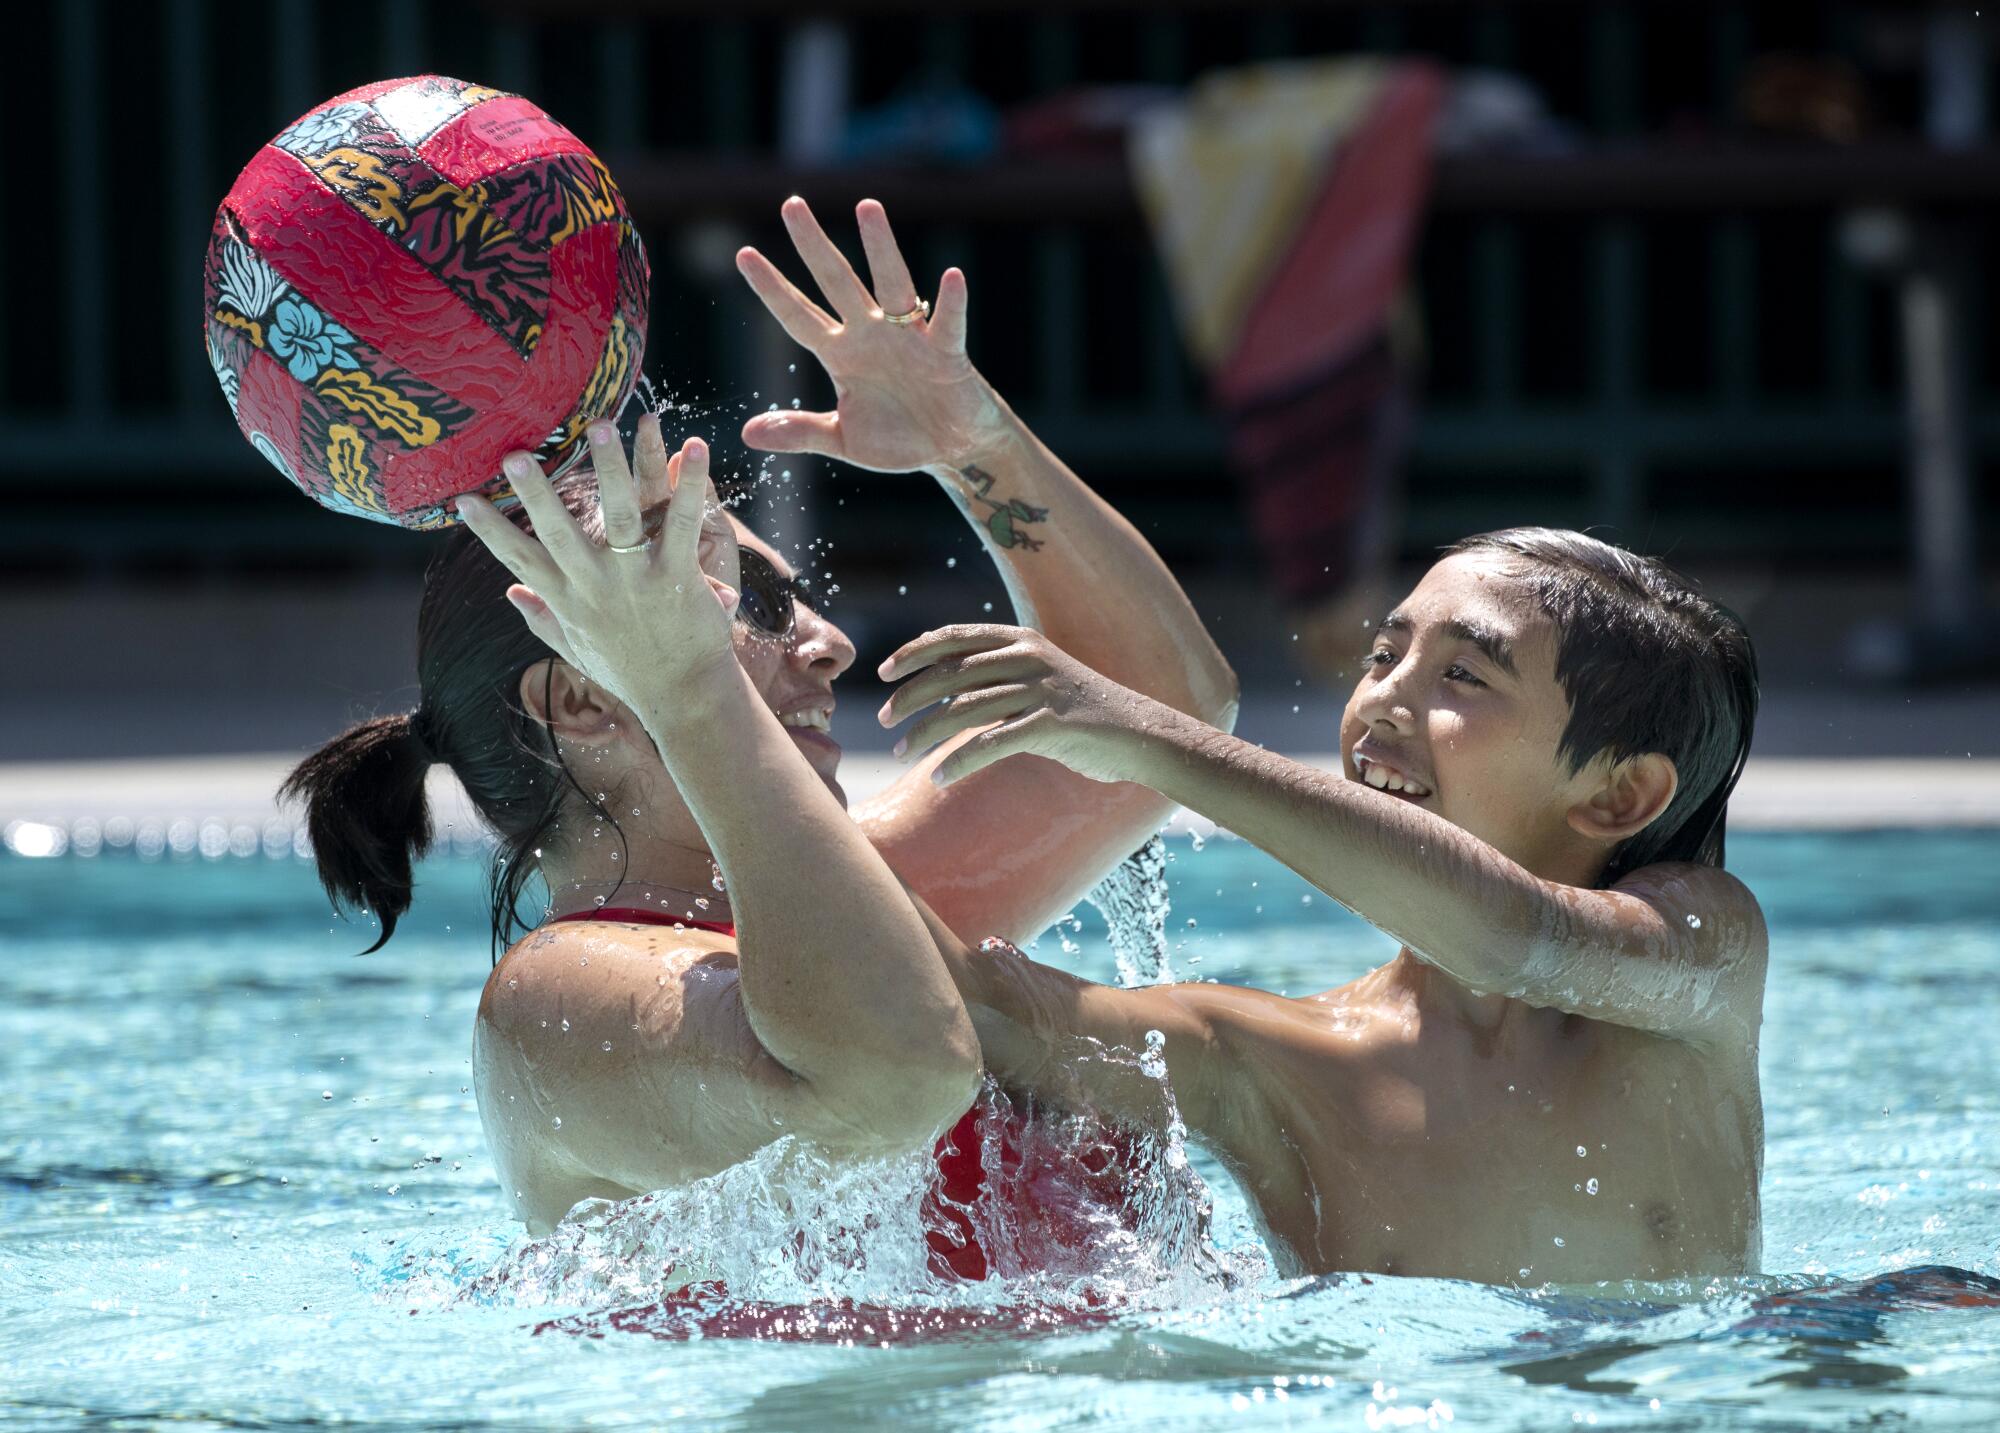 A woman and boy play with a ball in a swimming pool